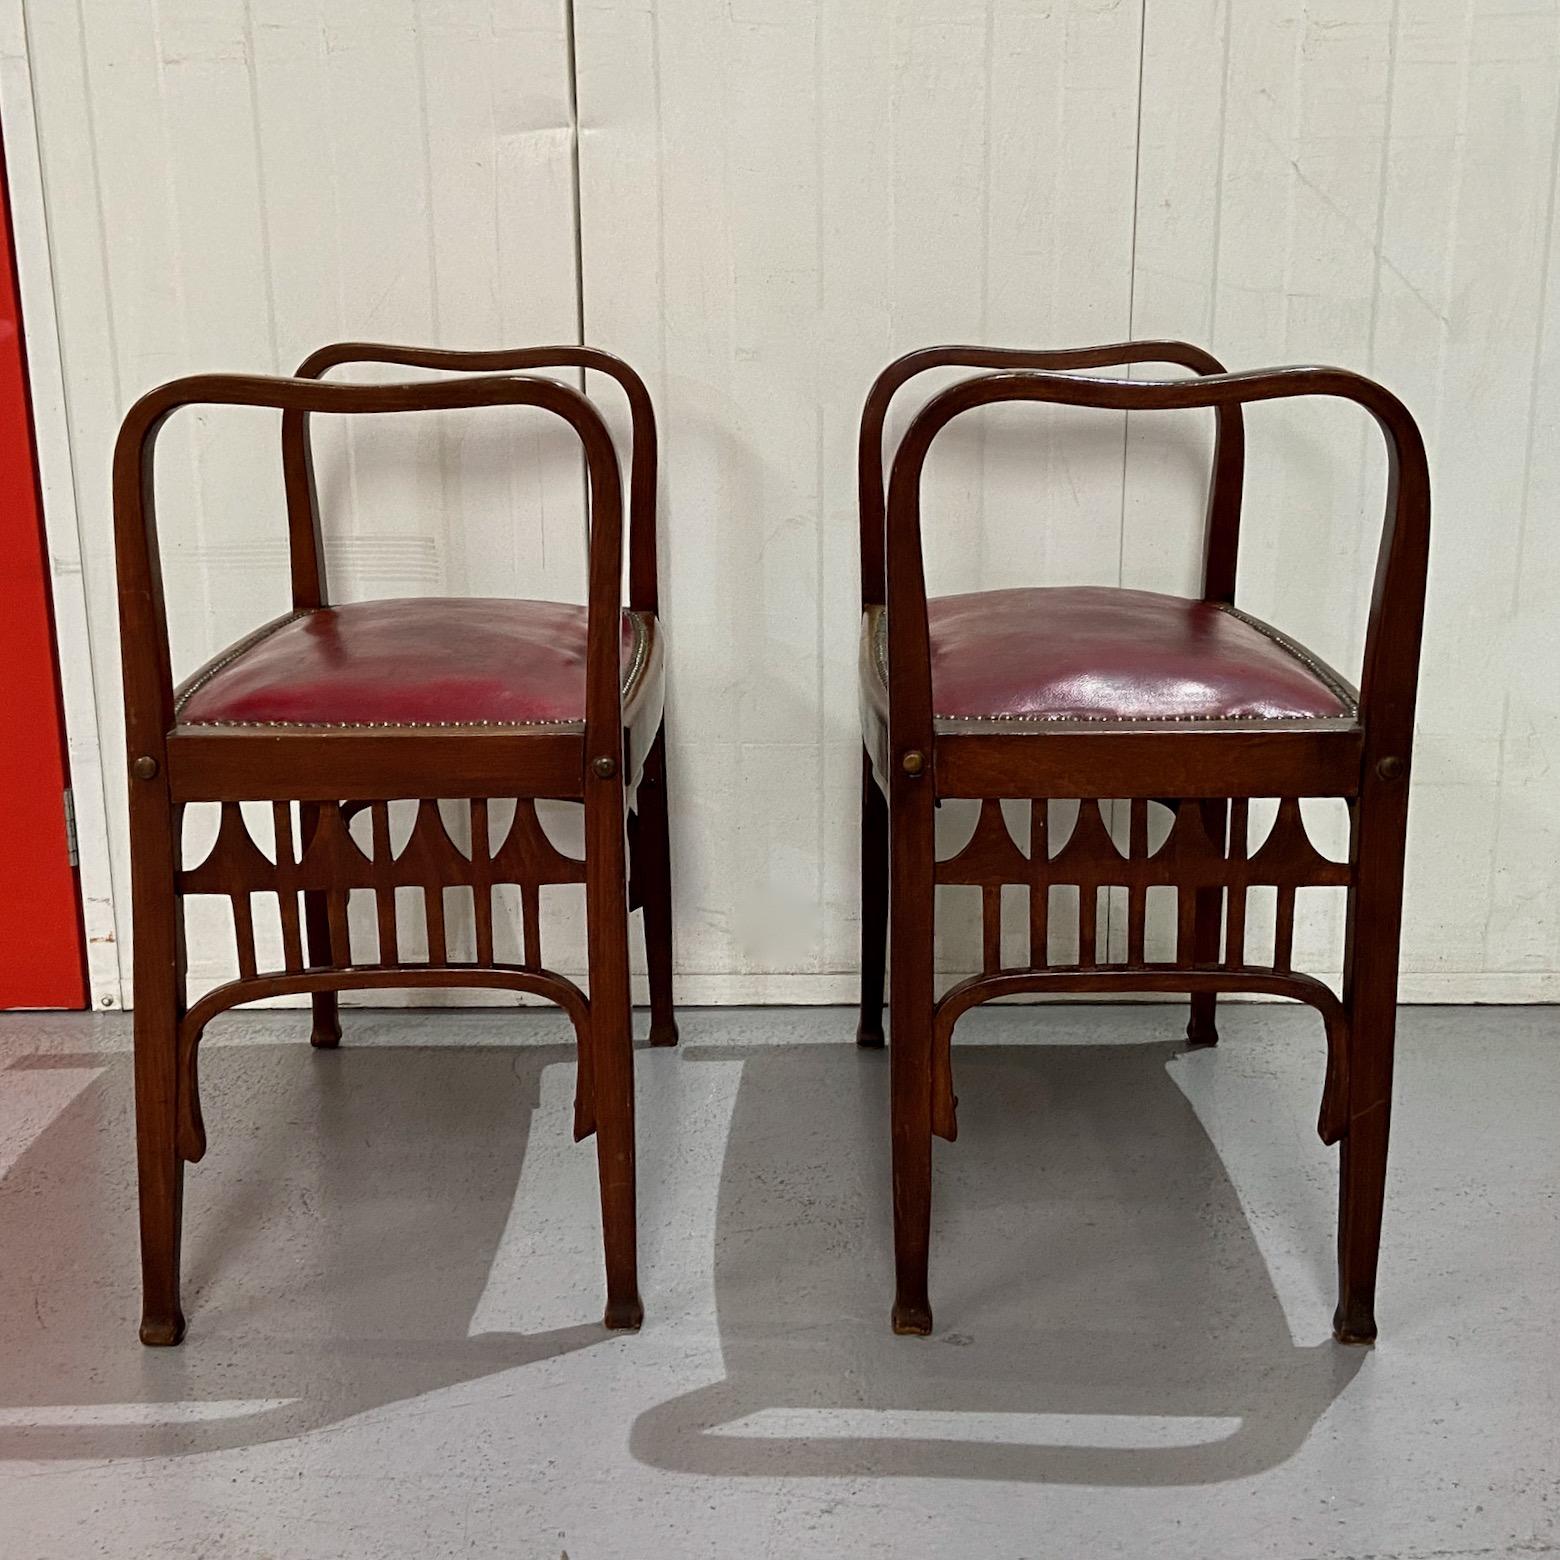 Pair of Austrian Secessionist Bentwood Stools, Benches or Causeuses, early 20thC For Sale 5